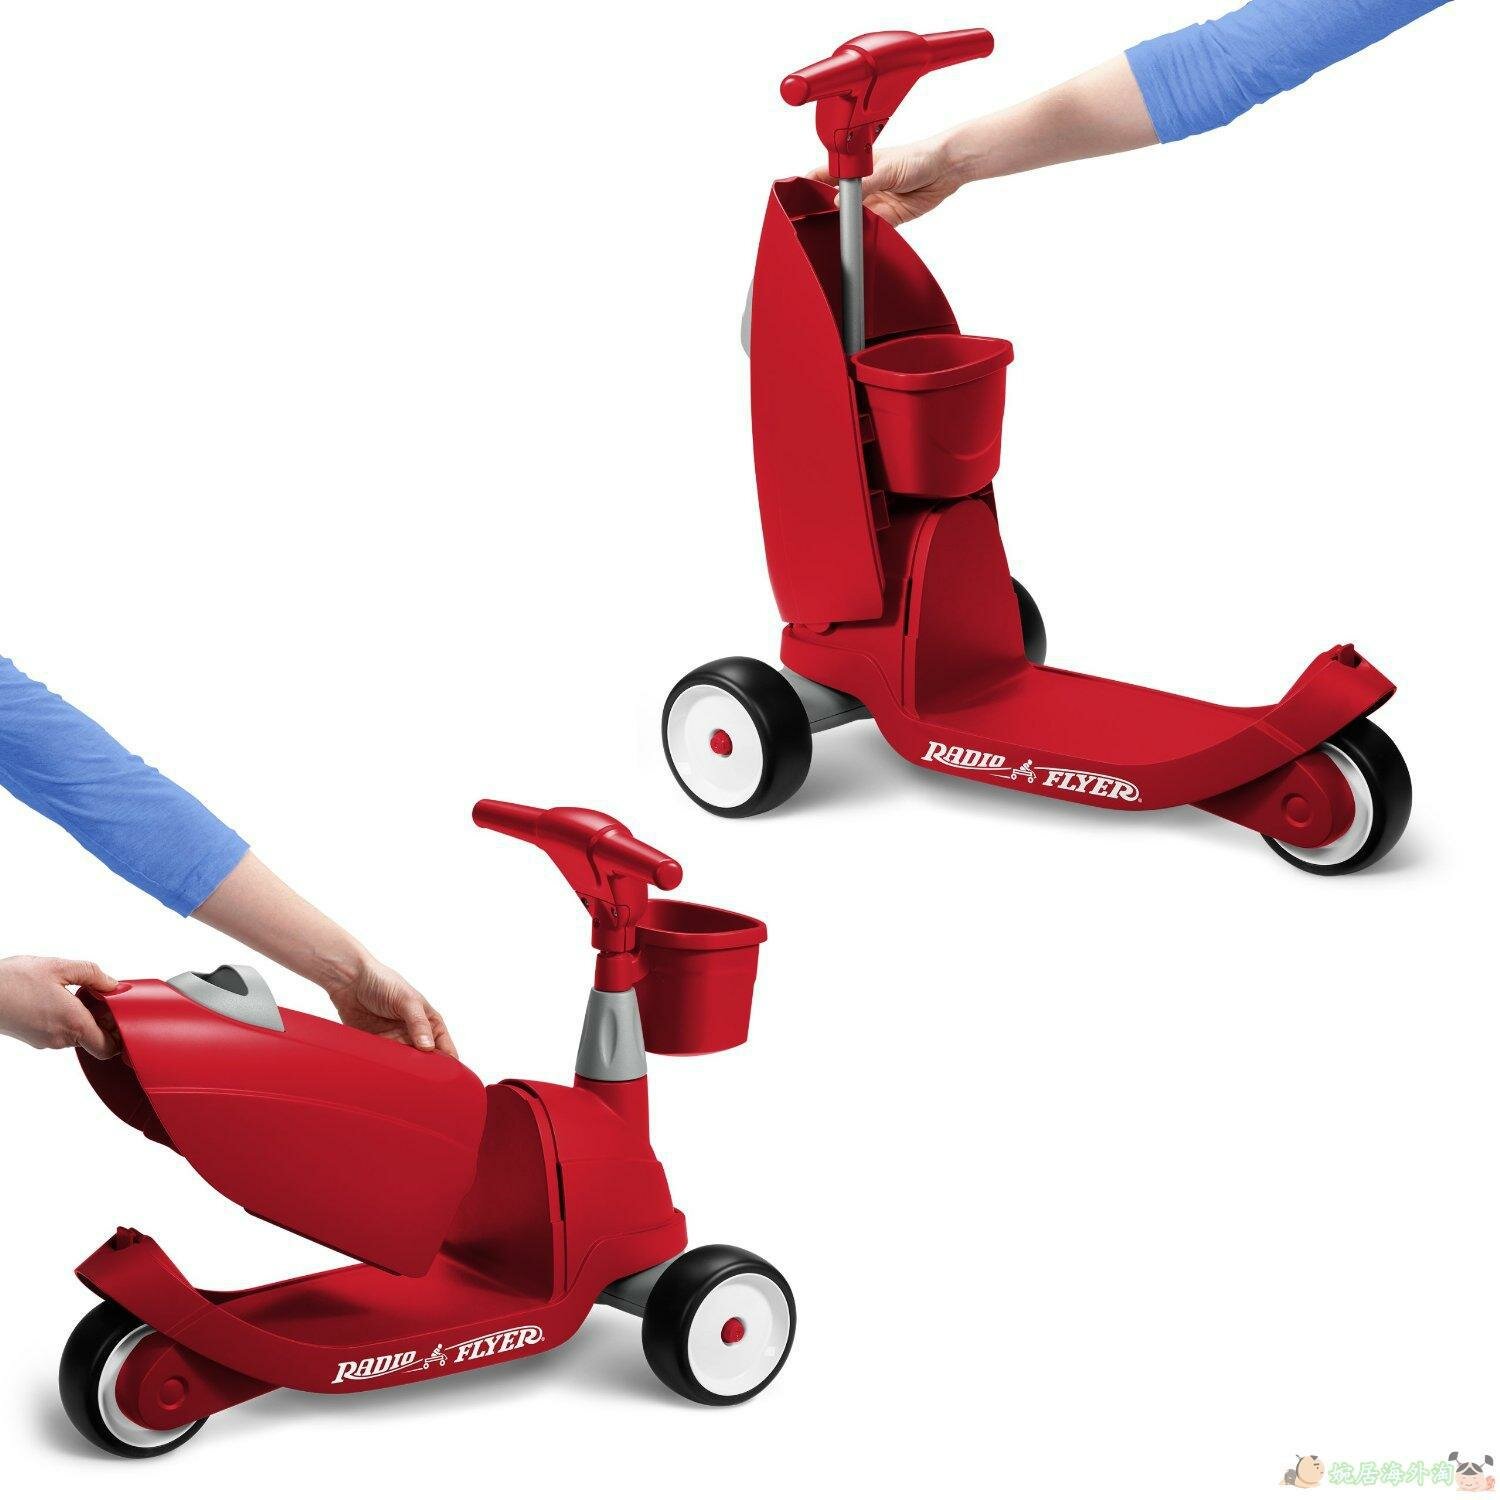 3-Wheeled-Scooter-w-Storage-Box-Seat-for-Kids-2-in-1-BabyChildrenToddlers-Walker--Ride-On-Scooter-To-1832204